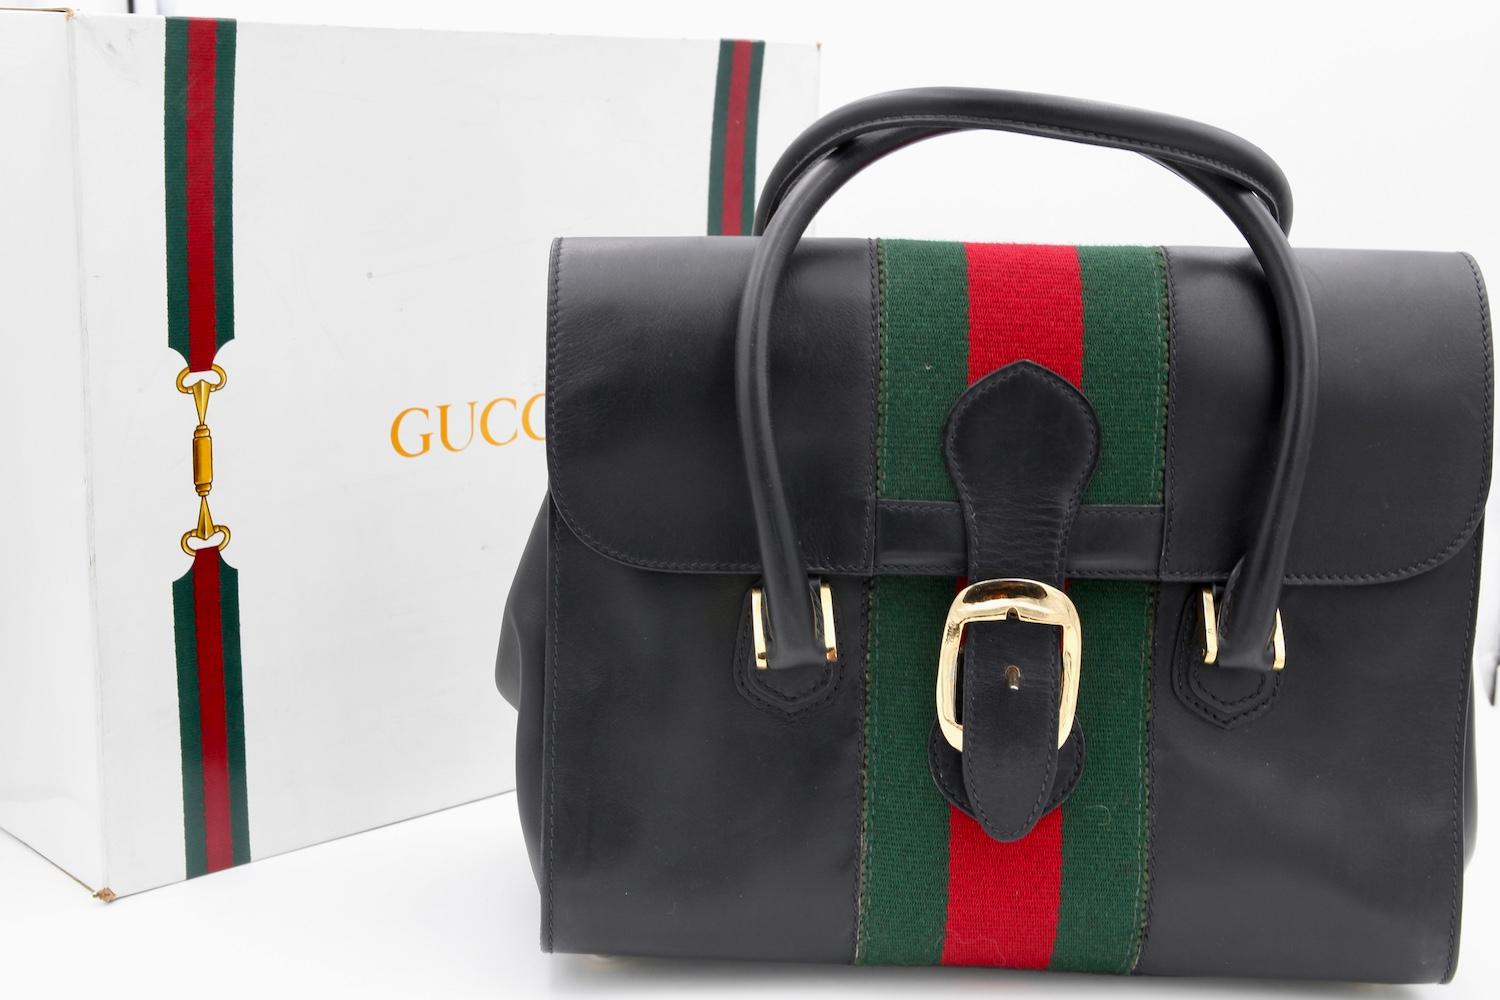 Vintage GUCCI Black Leather Doctor Bag, c.1980s.
Vintage Black Gucci Doctor Bag with classic green and red stripe accent through the center.
Featuring Gold hardware and buckle closure with gold feet on the base of bag. 
Double handle with 5inch